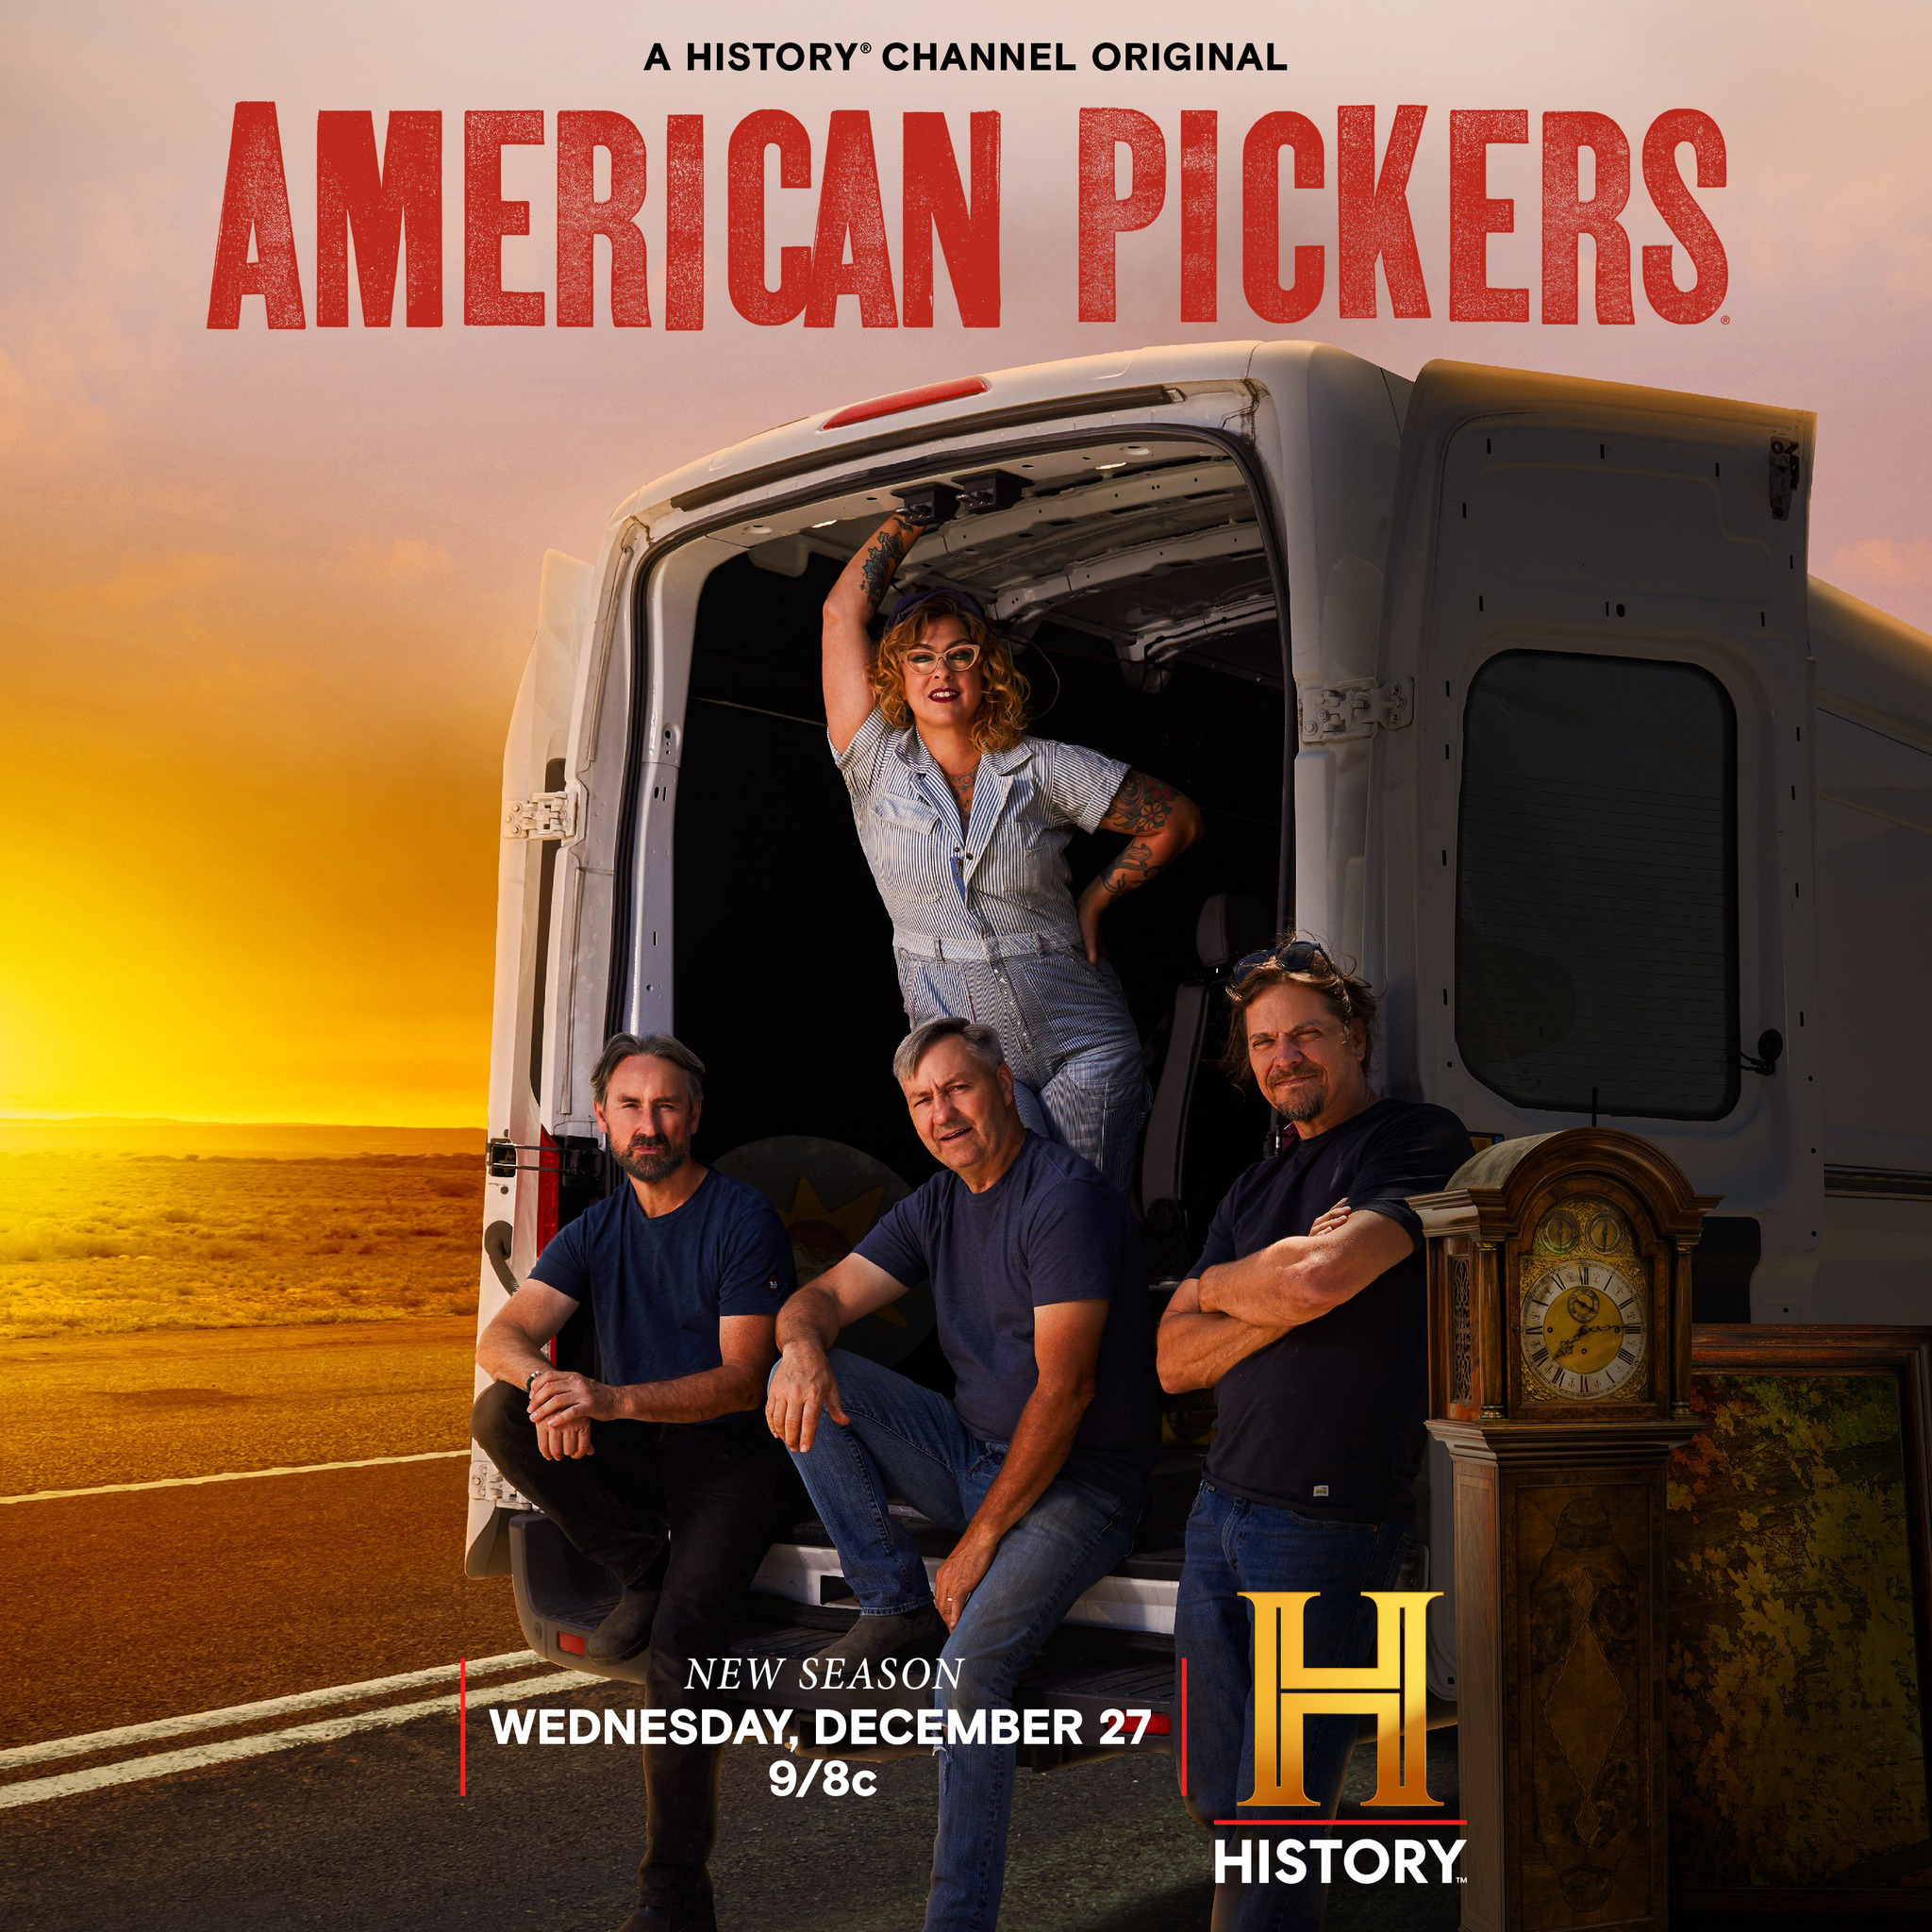 American Pickers' January 17 episode brought in 894,000 viewers